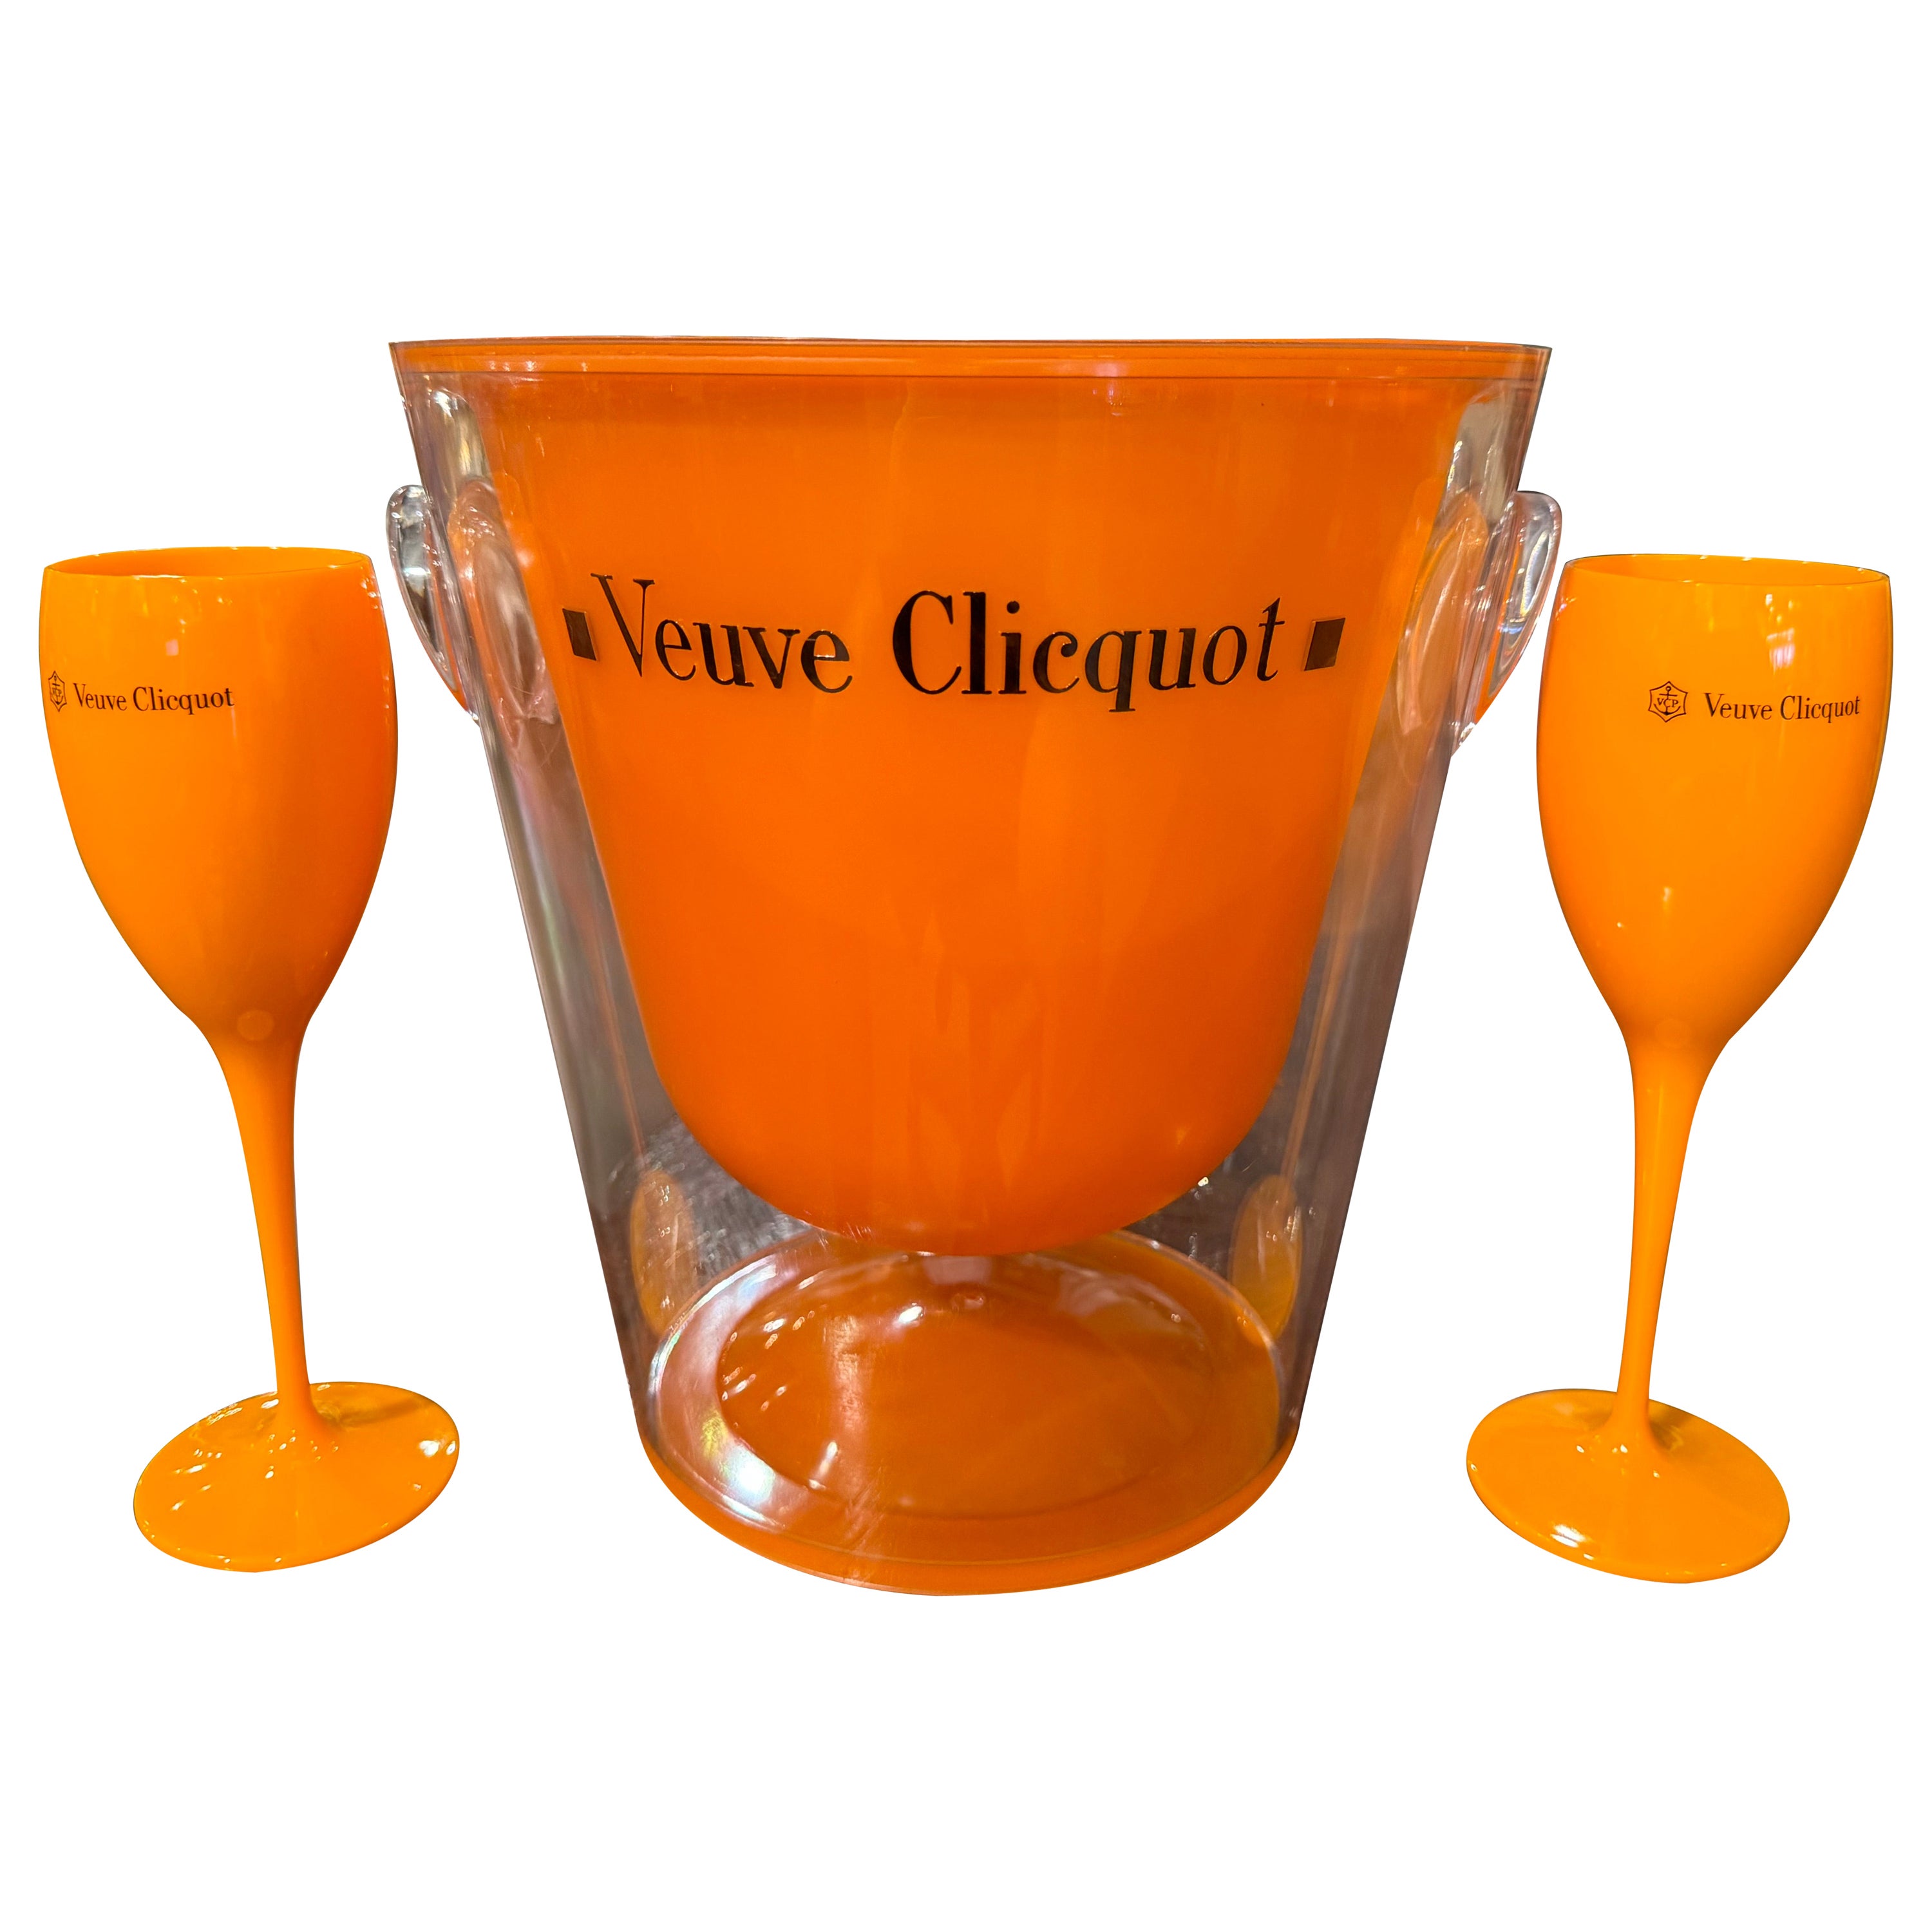 Vintage French Acrylic "Veuve Clicquot" Champagne Cooler Bucket and Two Flutes